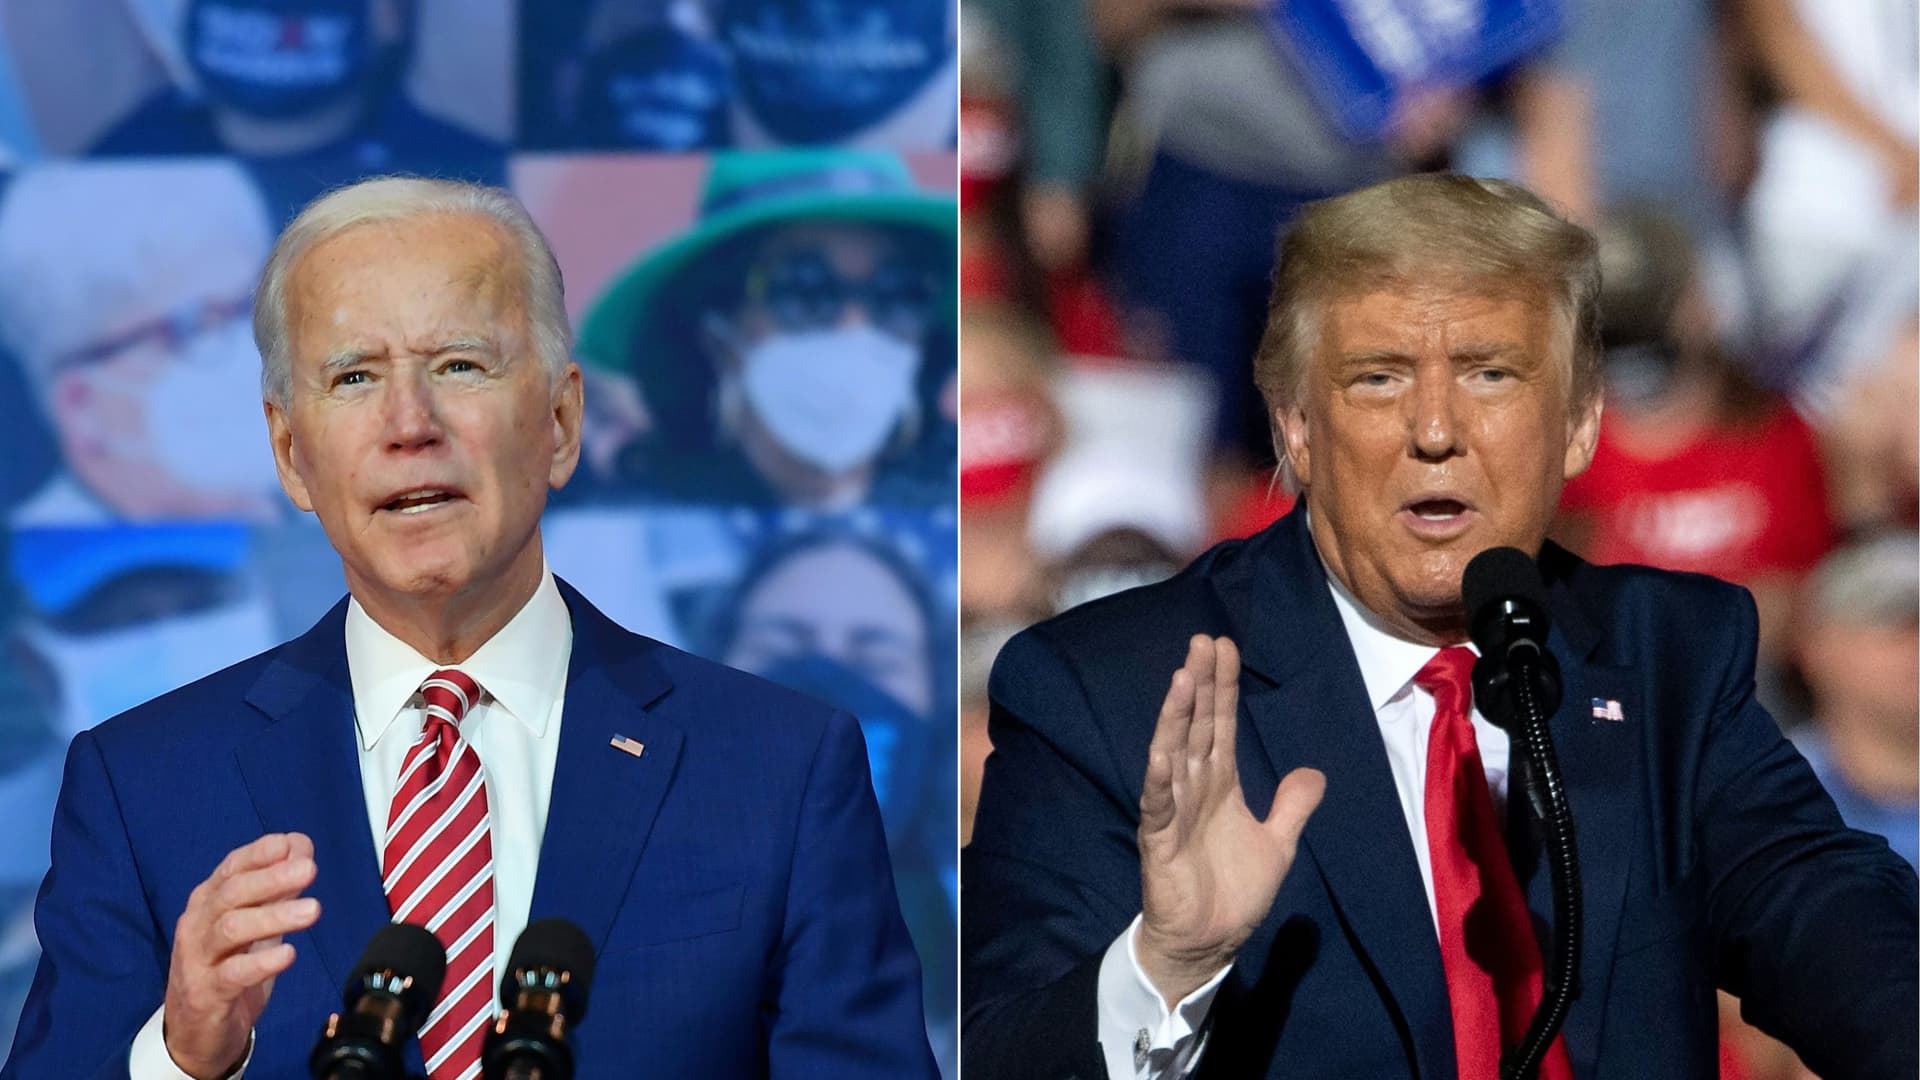 Democratic President-elect Joe Biden delivering remarks on Covid-19 at The Queen theater on Oct. 23, 2020 in Wilmington, Delaware and U.S. President Donald Trump addressing supporters during a Make America Great Again rally in Gastonia, North Carolina, Oct. 21, 2020.